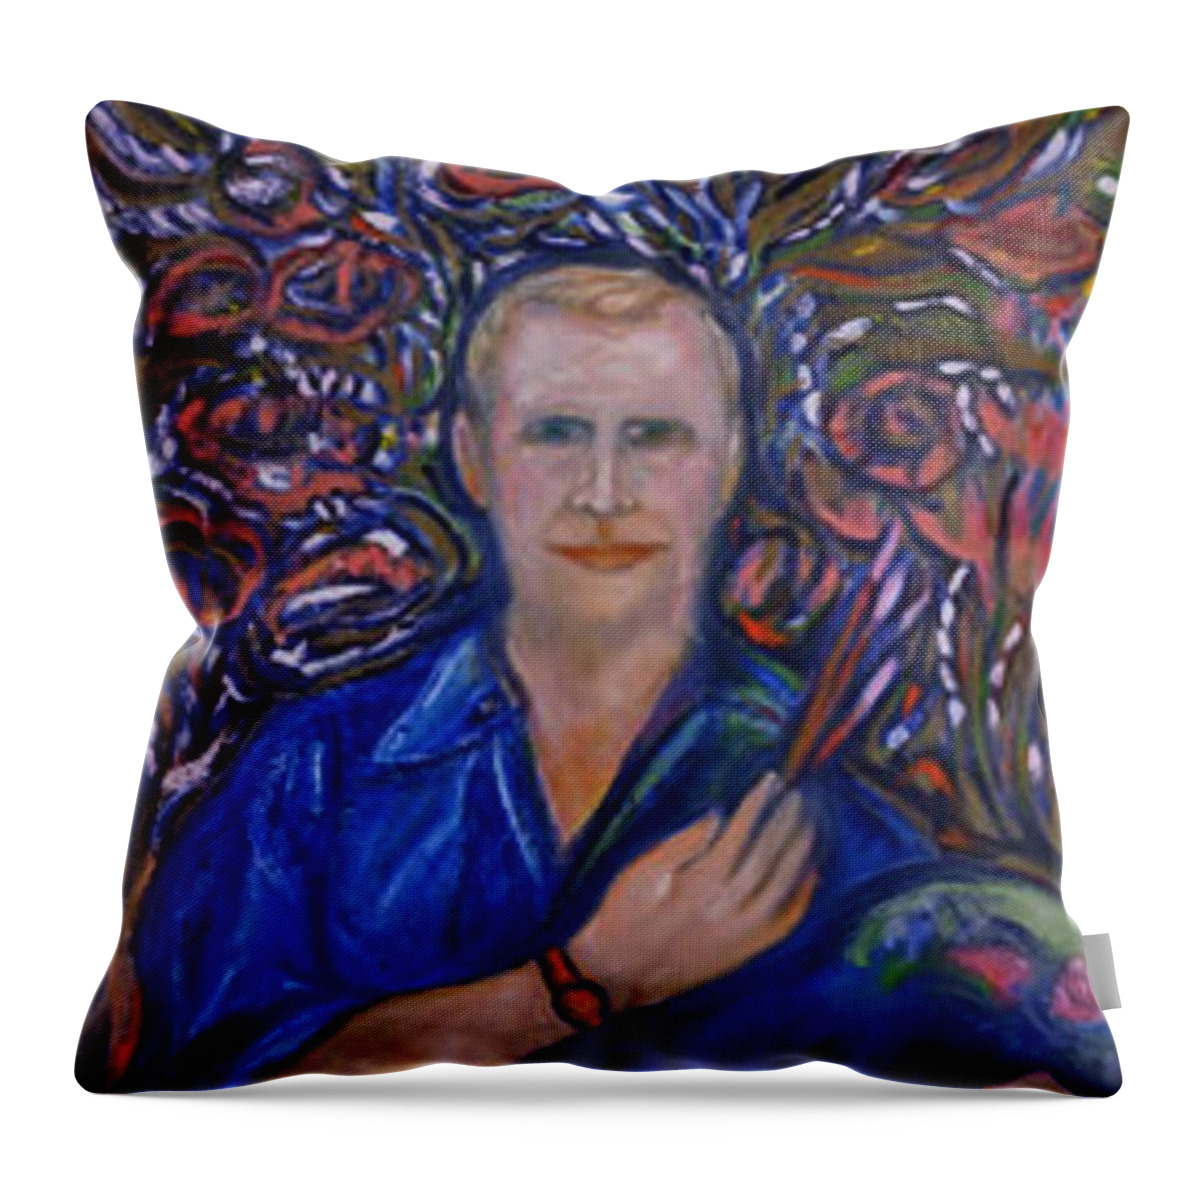  Throw Pillow featuring the painting Selfportray 1969 by Gunter Hortz